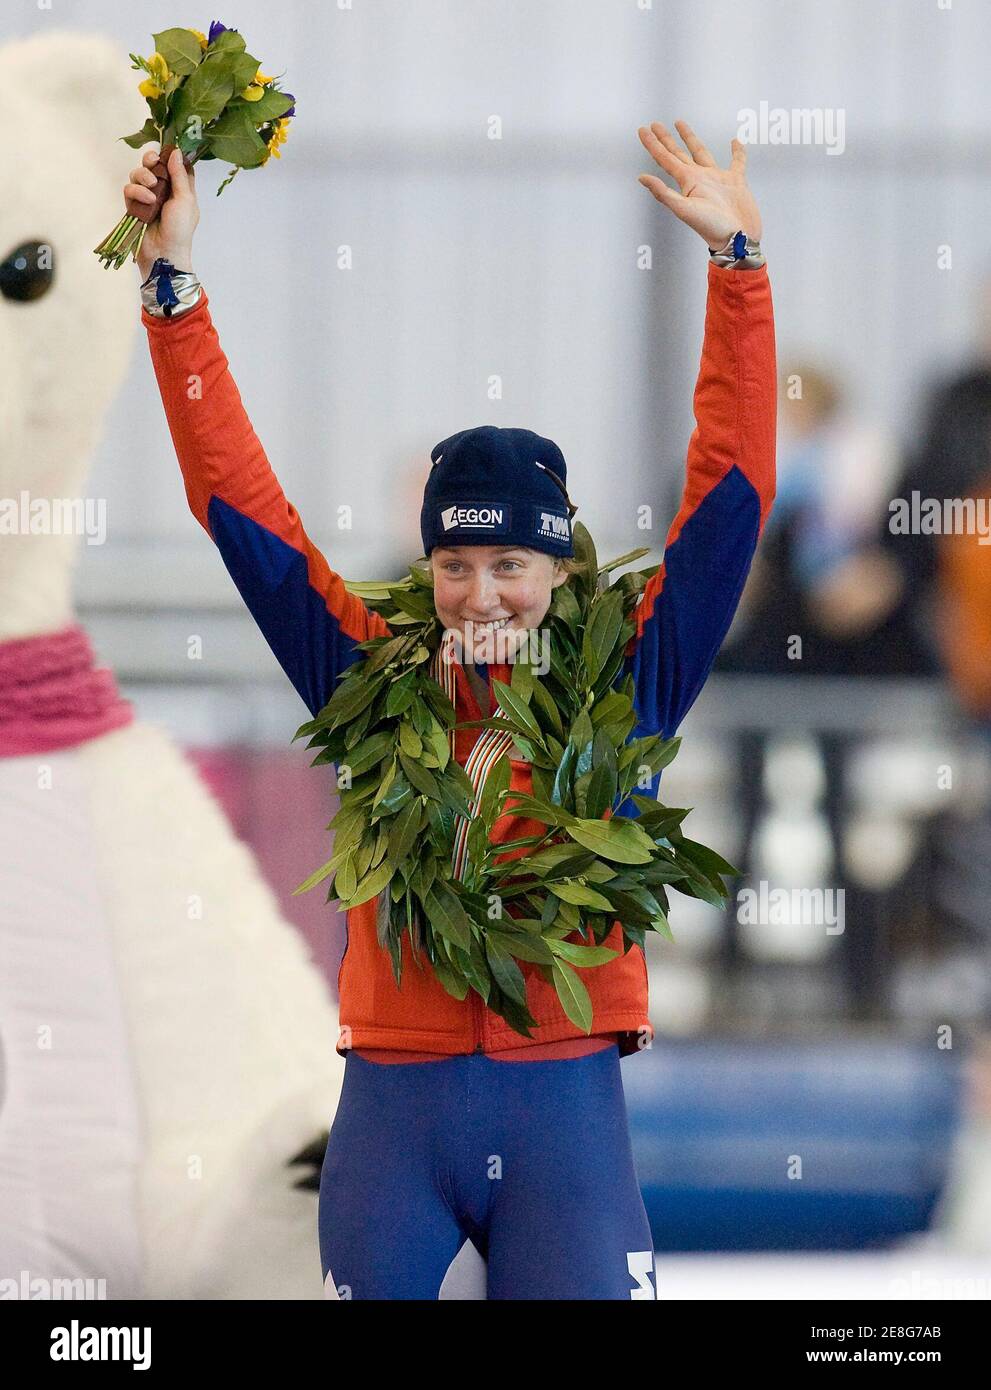 Renate Groenewold of the Netherlands celebrates her first place on the podium in the ladies 3000-metre during the World Cup Single Distance speed skating in Richmond, British Columbia March 12, 2009.       REUTERS/Andy Clark     (CANADA SPORT SPEED SKATING) Stock Photo